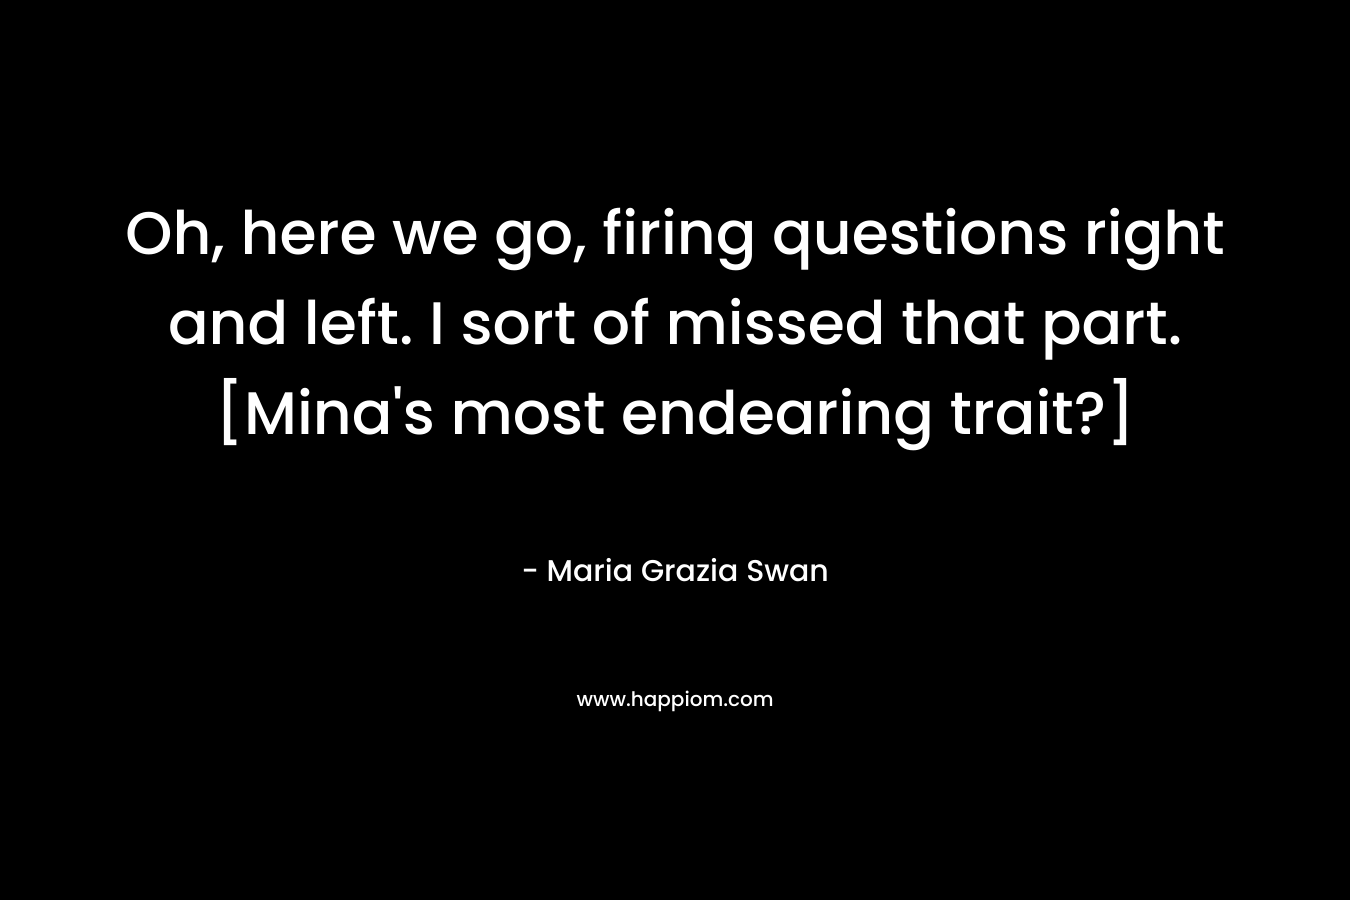 Oh, here we go, firing questions right and left. I sort of missed that part. [Mina’s most endearing trait?] – Maria Grazia Swan